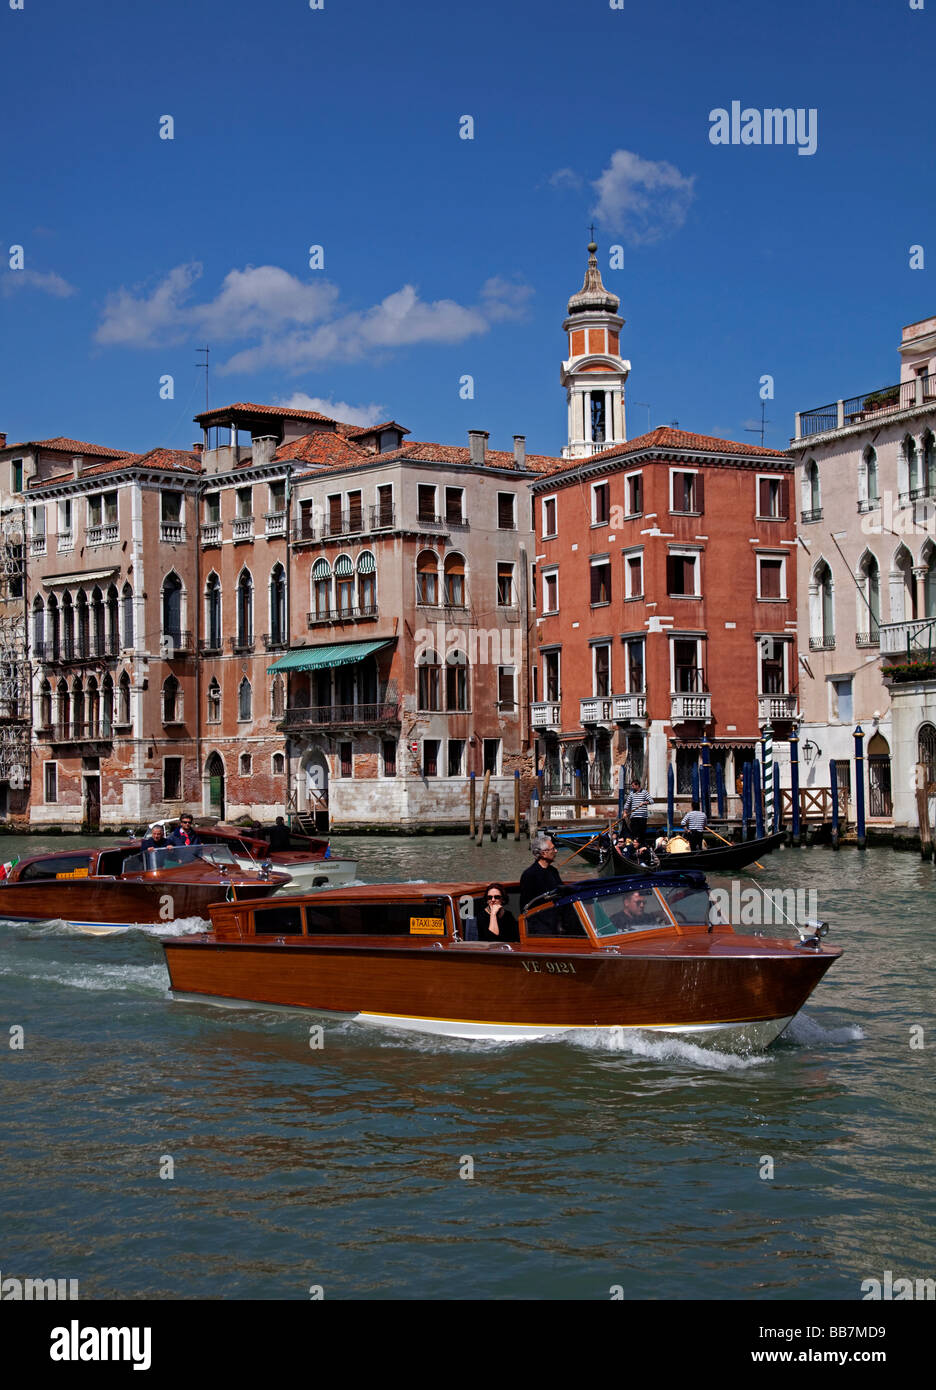 Taxi vessel on canal Venice, Italy Stock Photo